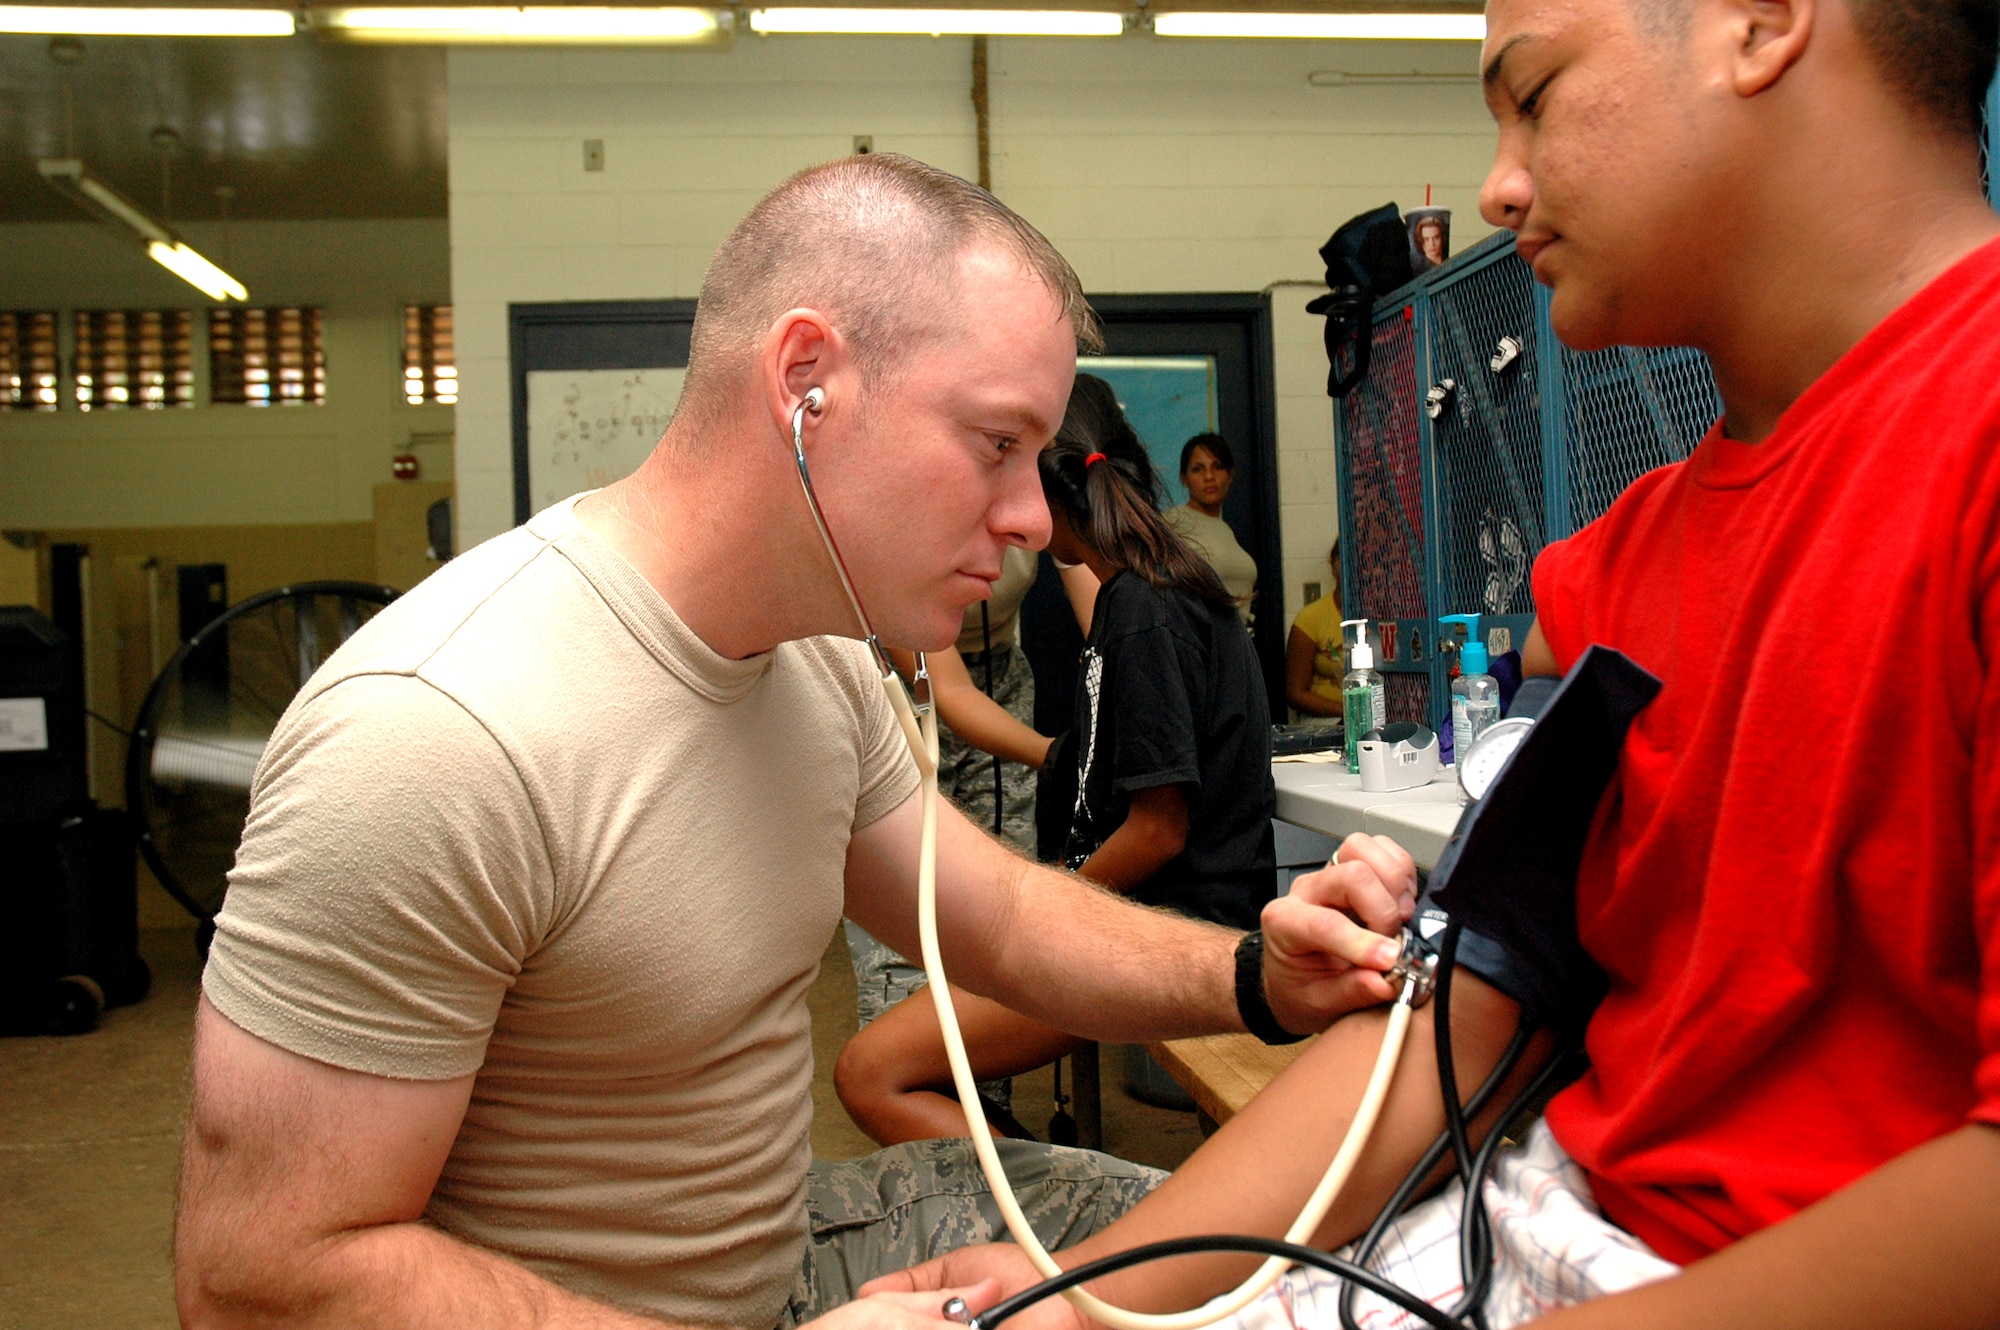 Tech. Sgt. Nate Steele, medical technician, 123rd Airlift Wing, Kentucky Air National Guard, checks blood pressure of a Waianae High School student athlete during sports physicals given by Air National Guard members at Waianae High School in Waianae, Hawaii, July 14. The physicals were part of the Innovative Readiness Training that took place from July 12-17, on the Leeward Coast of Oahu. (U.S. Air Force photo/Tech. Sgt. Betty J. Squatrito-Martin)